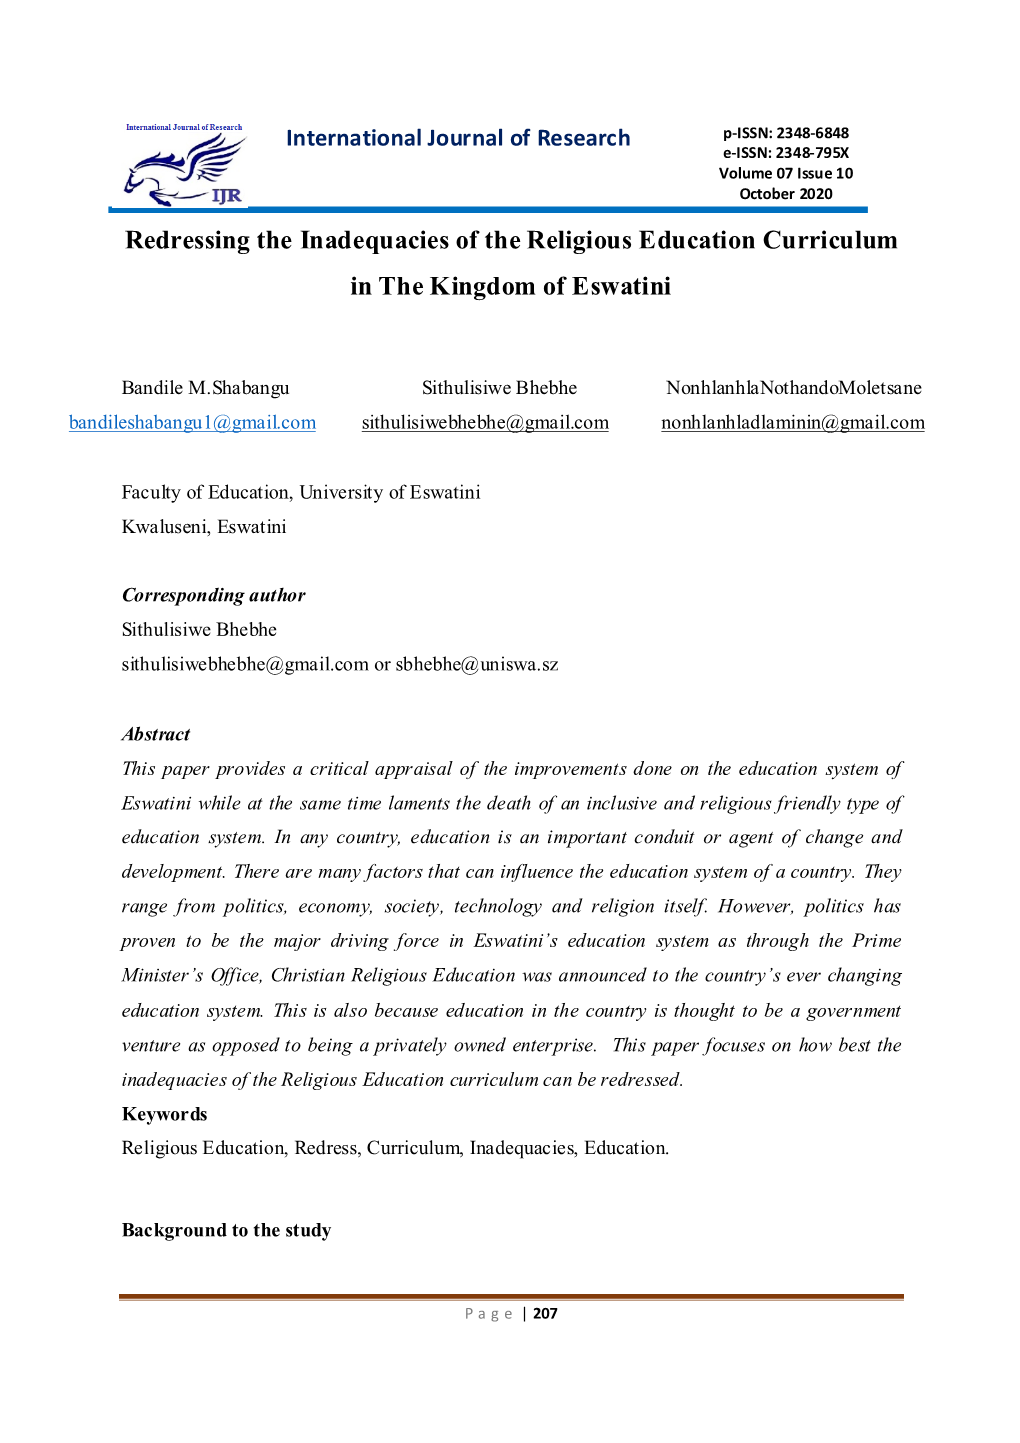 Redressing the Inadequacies of the Religious Education Curriculum in the Kingdom of Eswatini